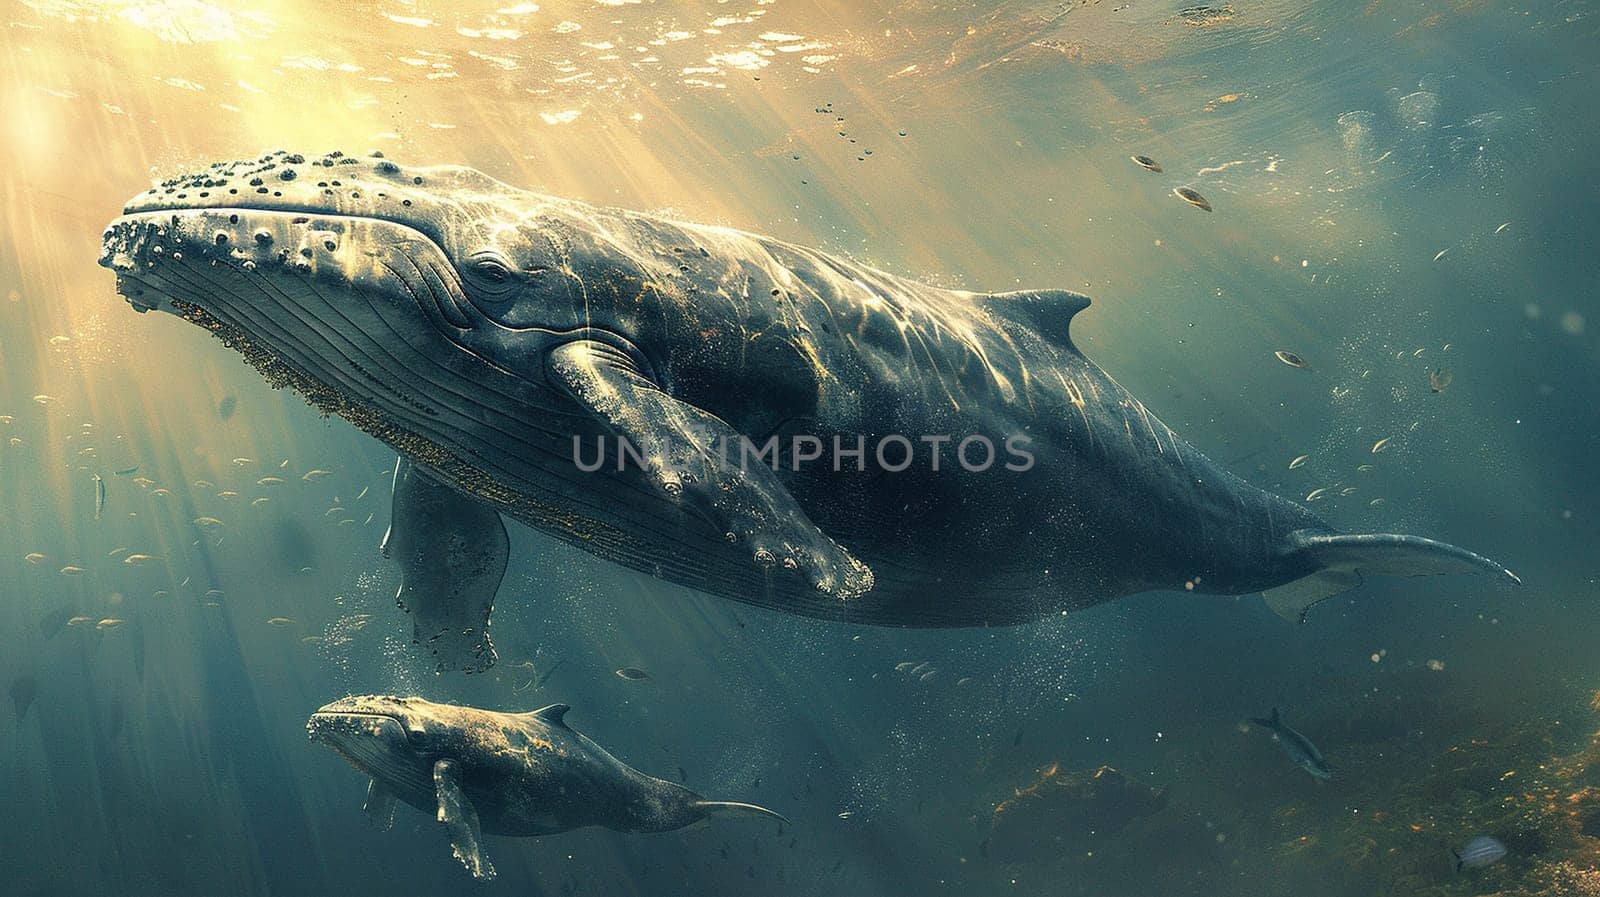 An adult whale and a newborn calf underwater. Generated by artificial intelligence by Vovmar